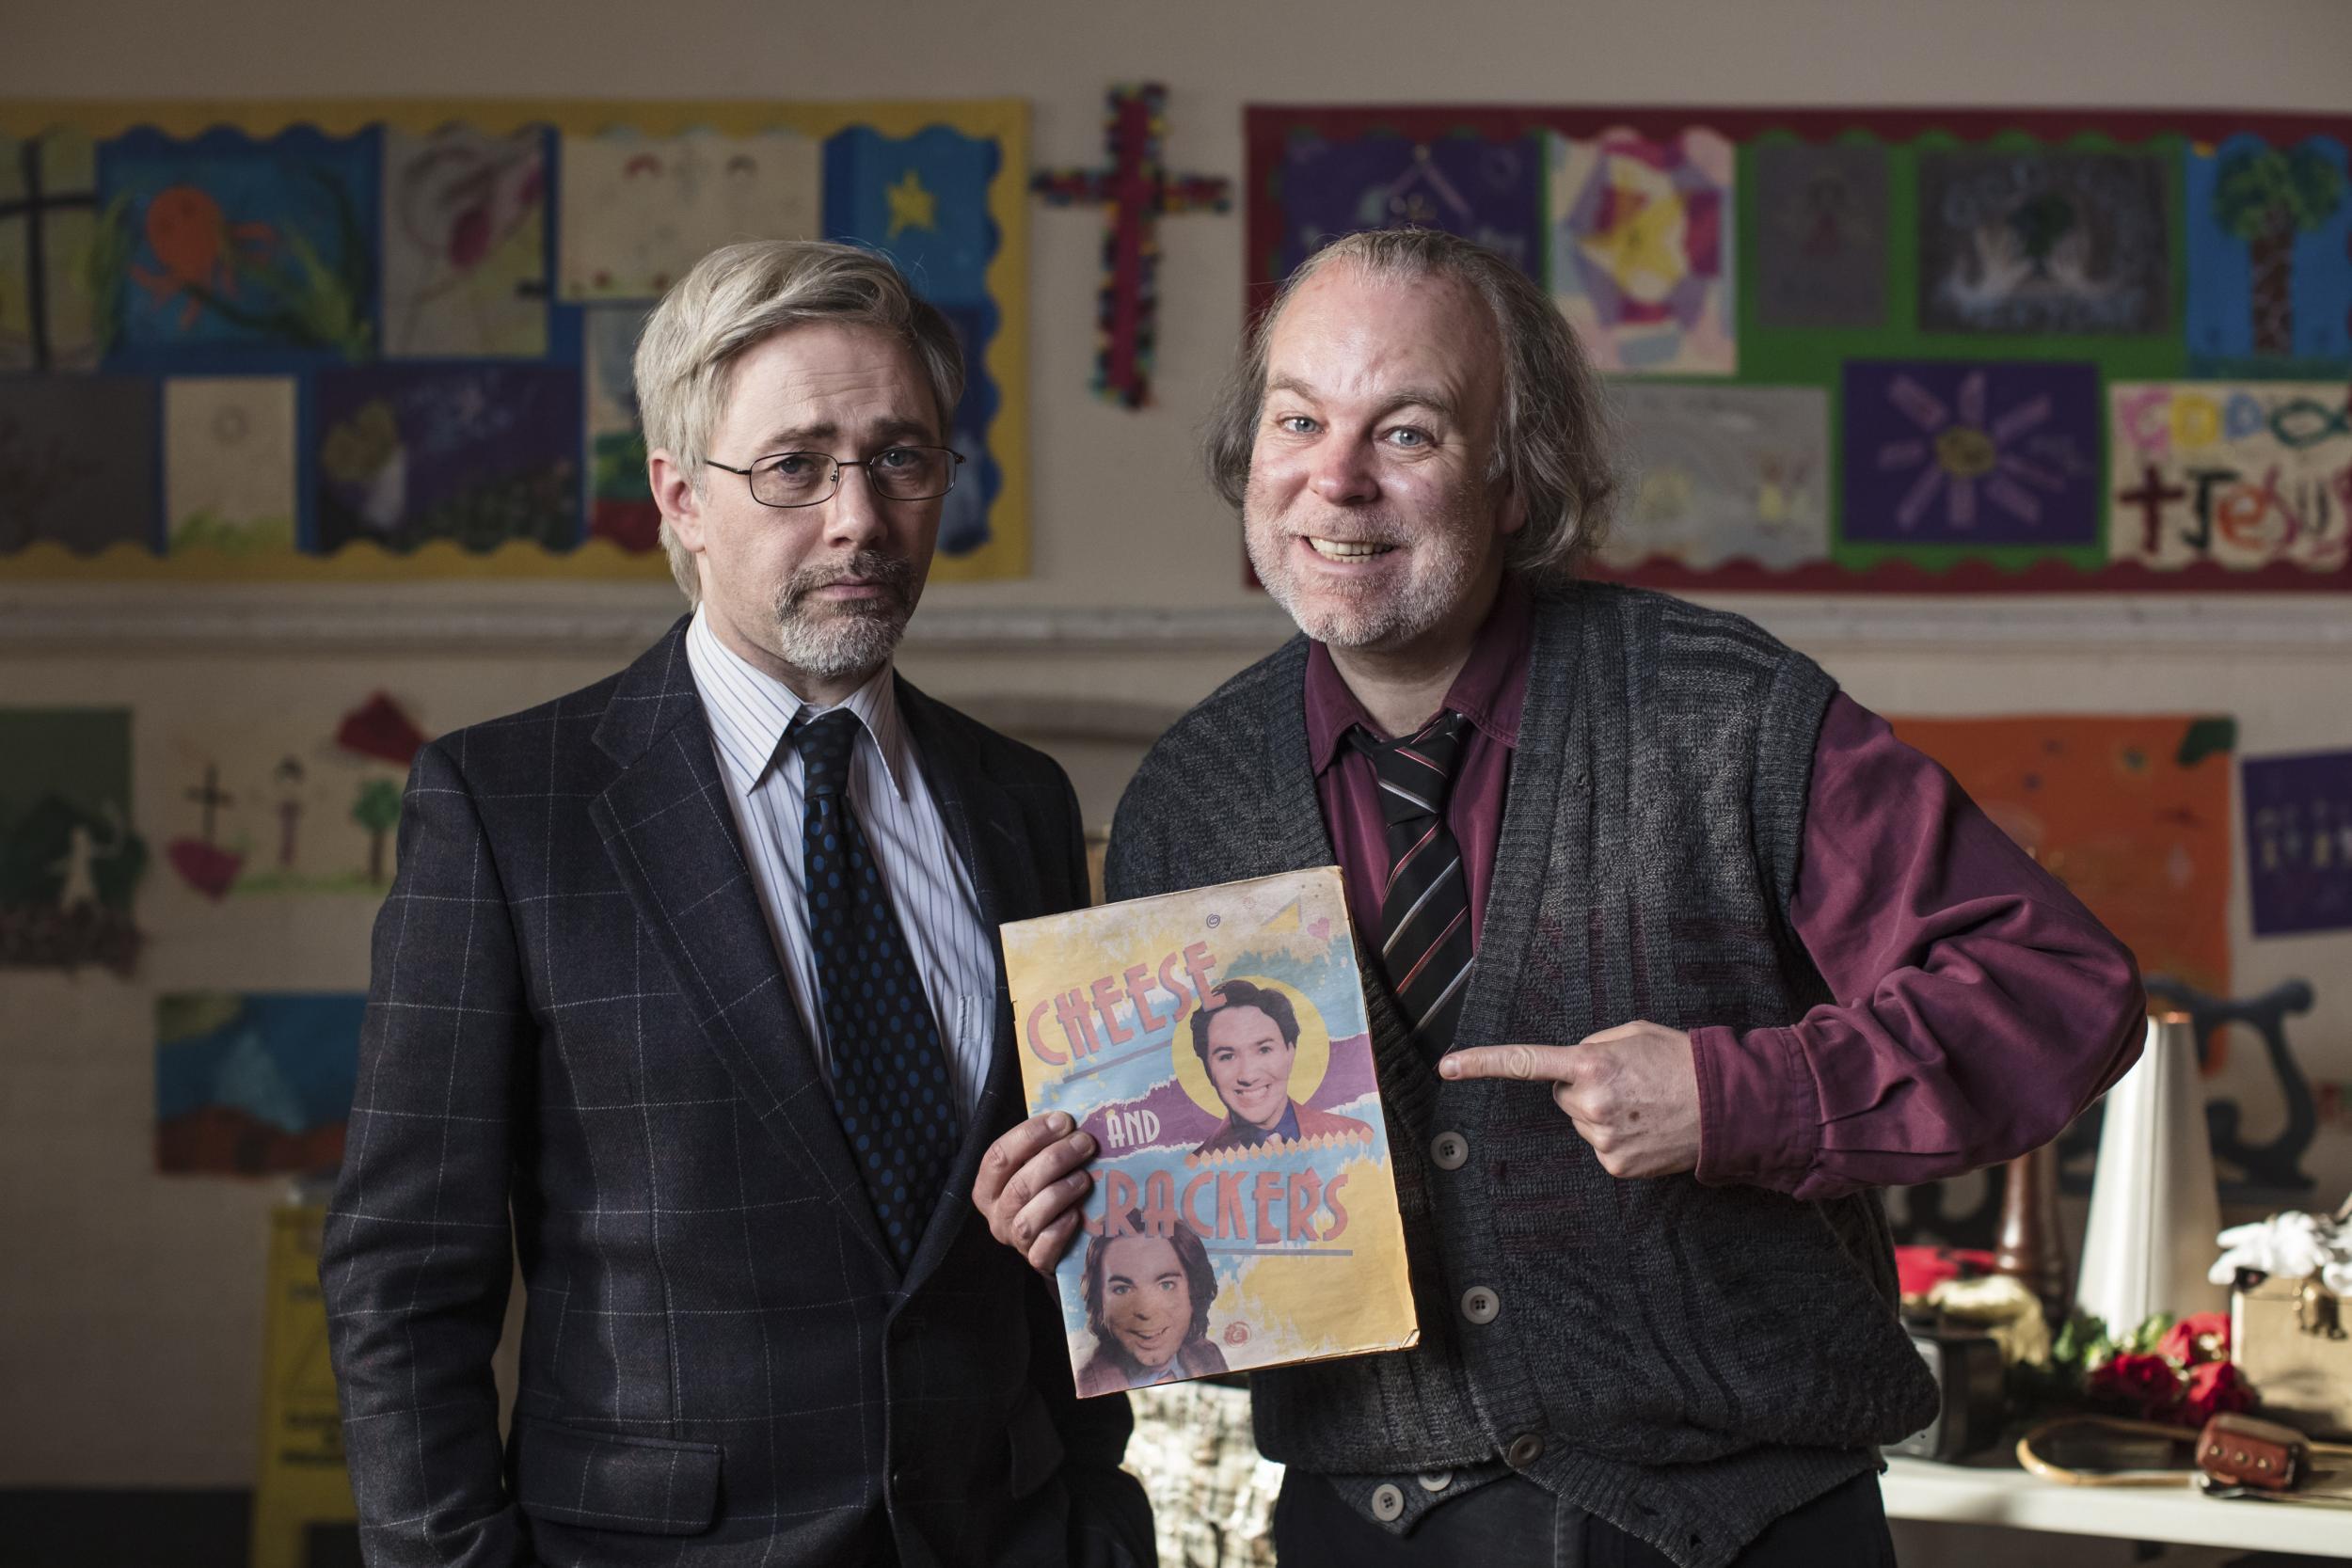 Reece Shearsmith (left) and Steve Pemberton as washed-up entertainers in the anthology series